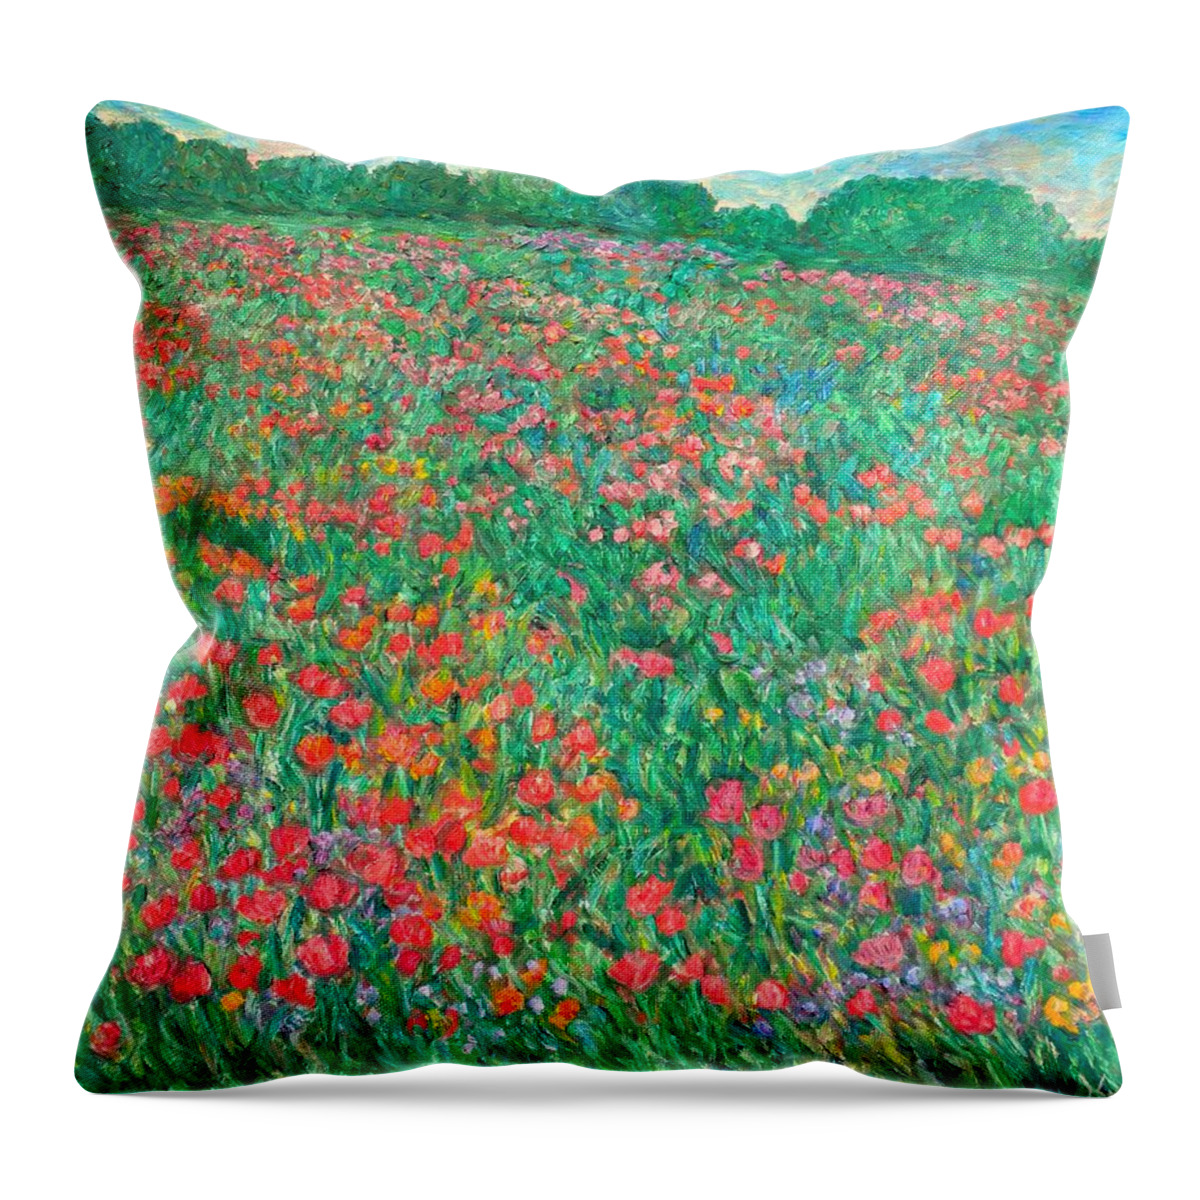 Poppy Throw Pillow featuring the painting Poppy View by Kendall Kessler